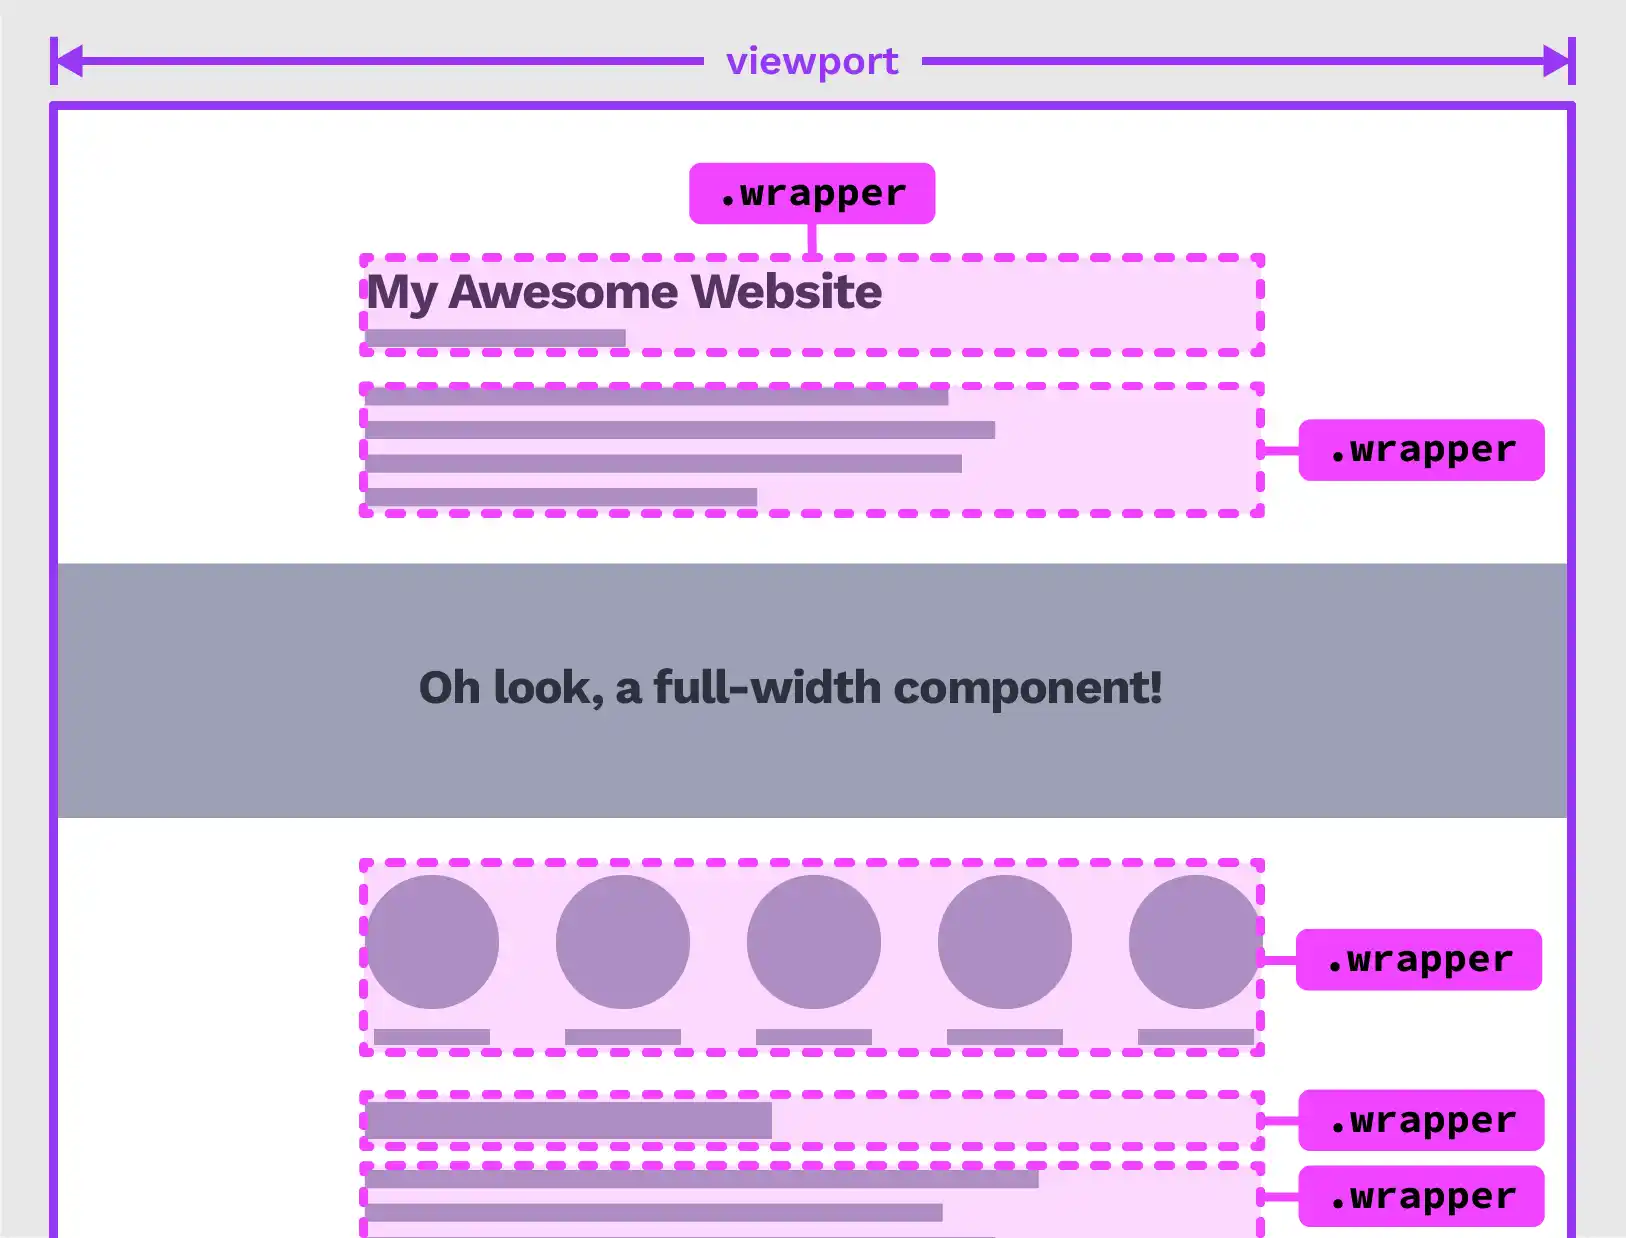 Every component either side of the full-width section has its own wrapper, denoted by a pink dotted line